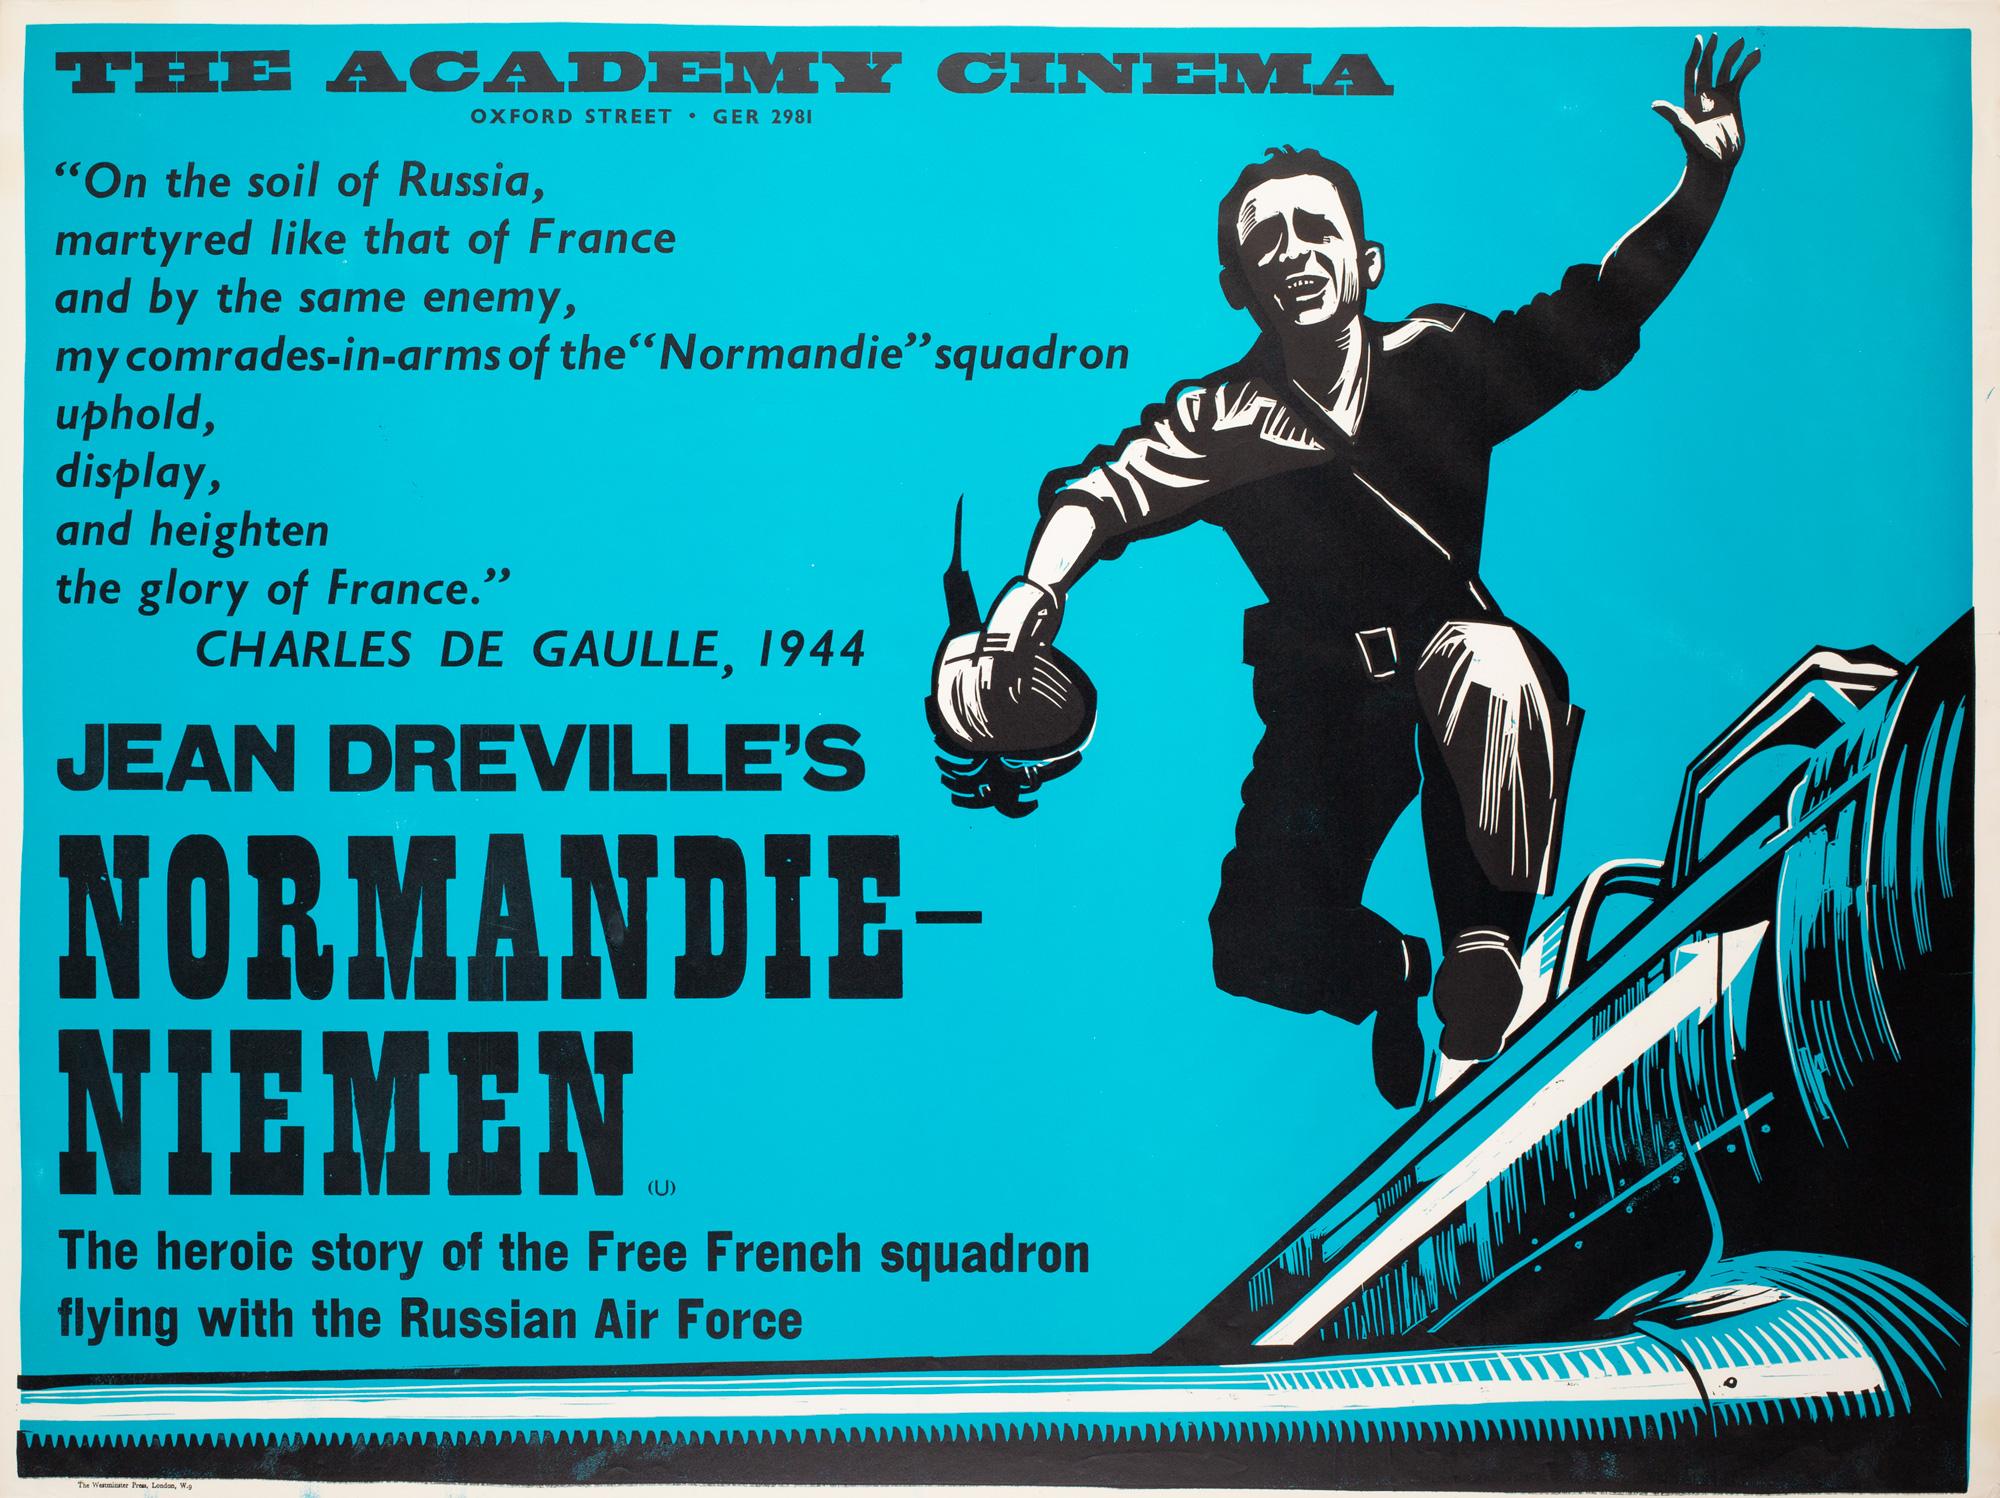 Original Academy Cinema British film poster for 60s war drama Normandie Niemen featuring a wonderful design by Peter Strausfeld.

Cologne born Strausfeld came to England in 1938. Whilst interned on the Isle of Man during the Second World War, he